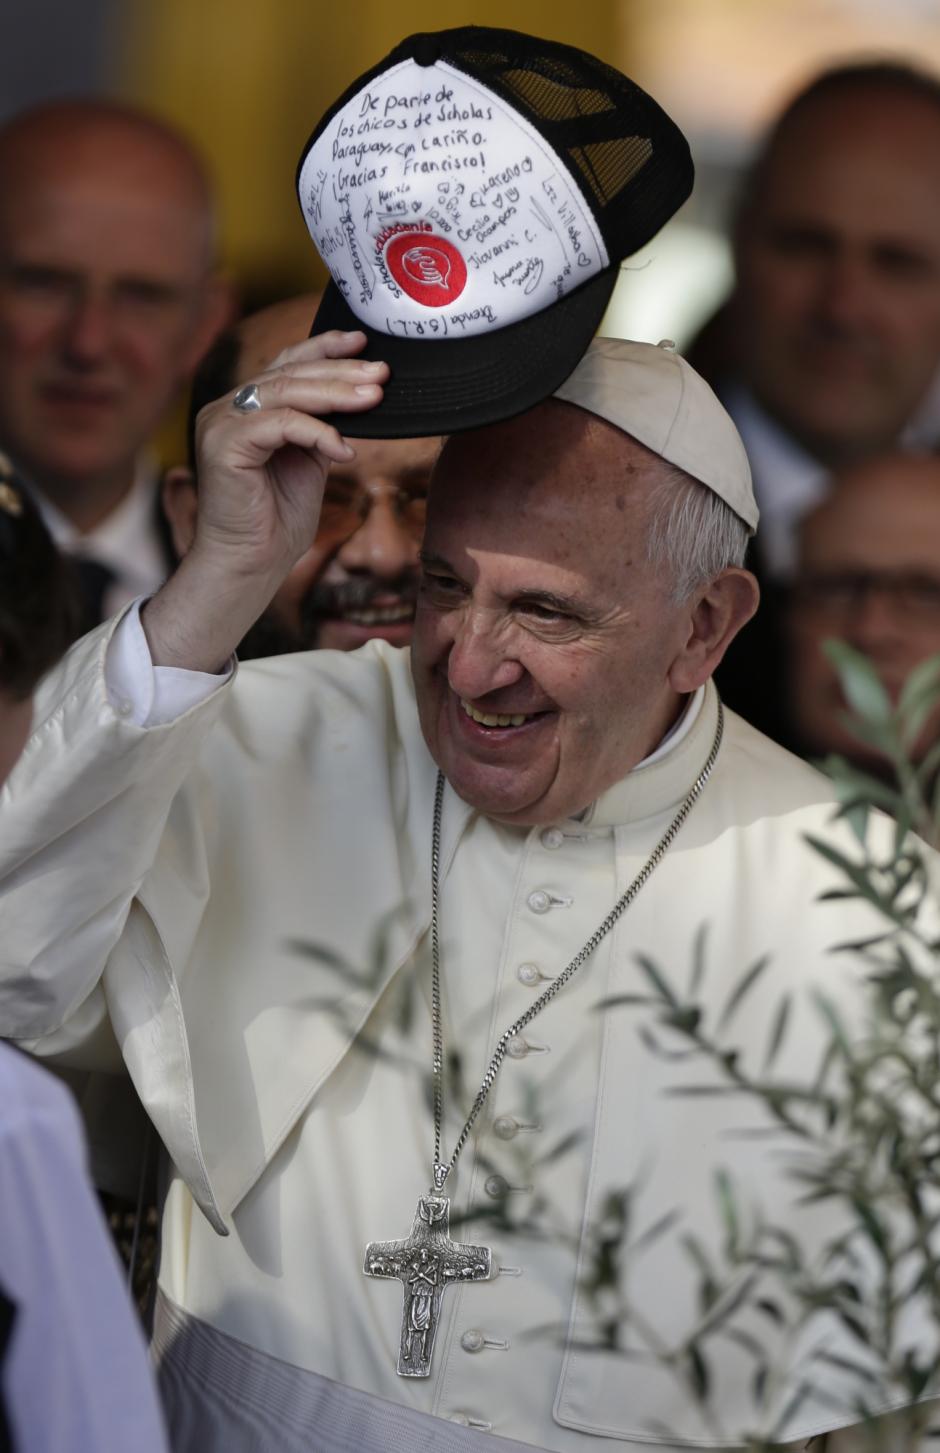 Pope Francis I Pope Francis puts on a cap of "Scholas Ocurrentes" in Asuncion, Paraguay, Sunday, July 12, 2015